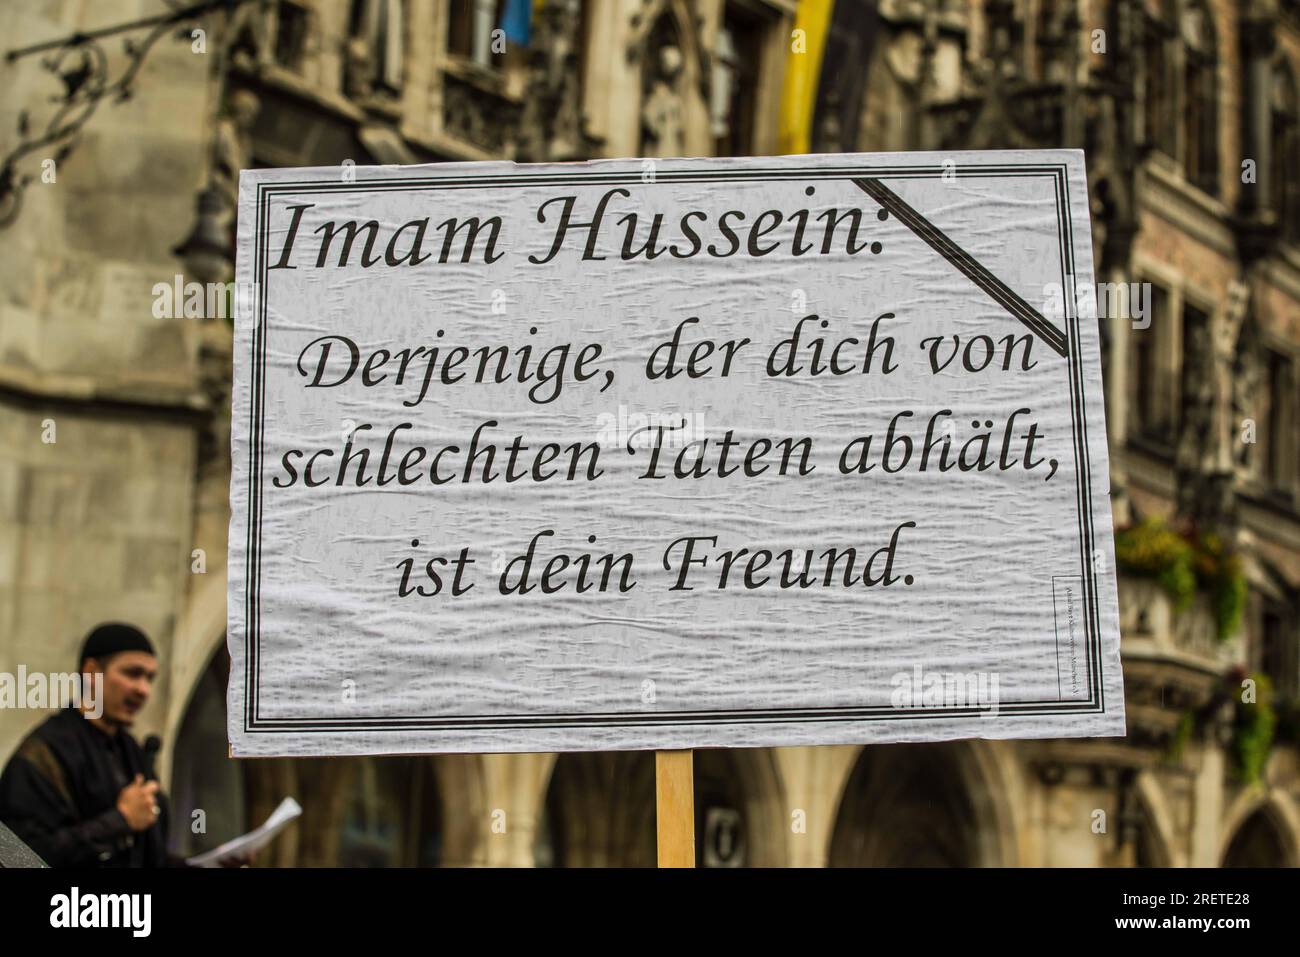 July 29, 2023, Munich, Bavaria, Germany: The Ahlul Bayt Kulturverein Muenchen e.V. organized an Ashura Trauermarsch (funeral march) for third Imam of Shiite Islam Husayn al Abidin- said to be a grandson of Mohammed whose death is one of the sources of Shiite-Sunni tensions. The Ahlul Bayt Kulturverein is seen as being connected to or being an arm of the Iranian regime and is officially under the Islamische Gemeinschaft der Schiitischen Gemeinden (IGS) who, in the past, has been linked to the controversial al-Quds Tag demo. The Ashura marches are better known as the events in Iran, Afghanistan, Stock Photo